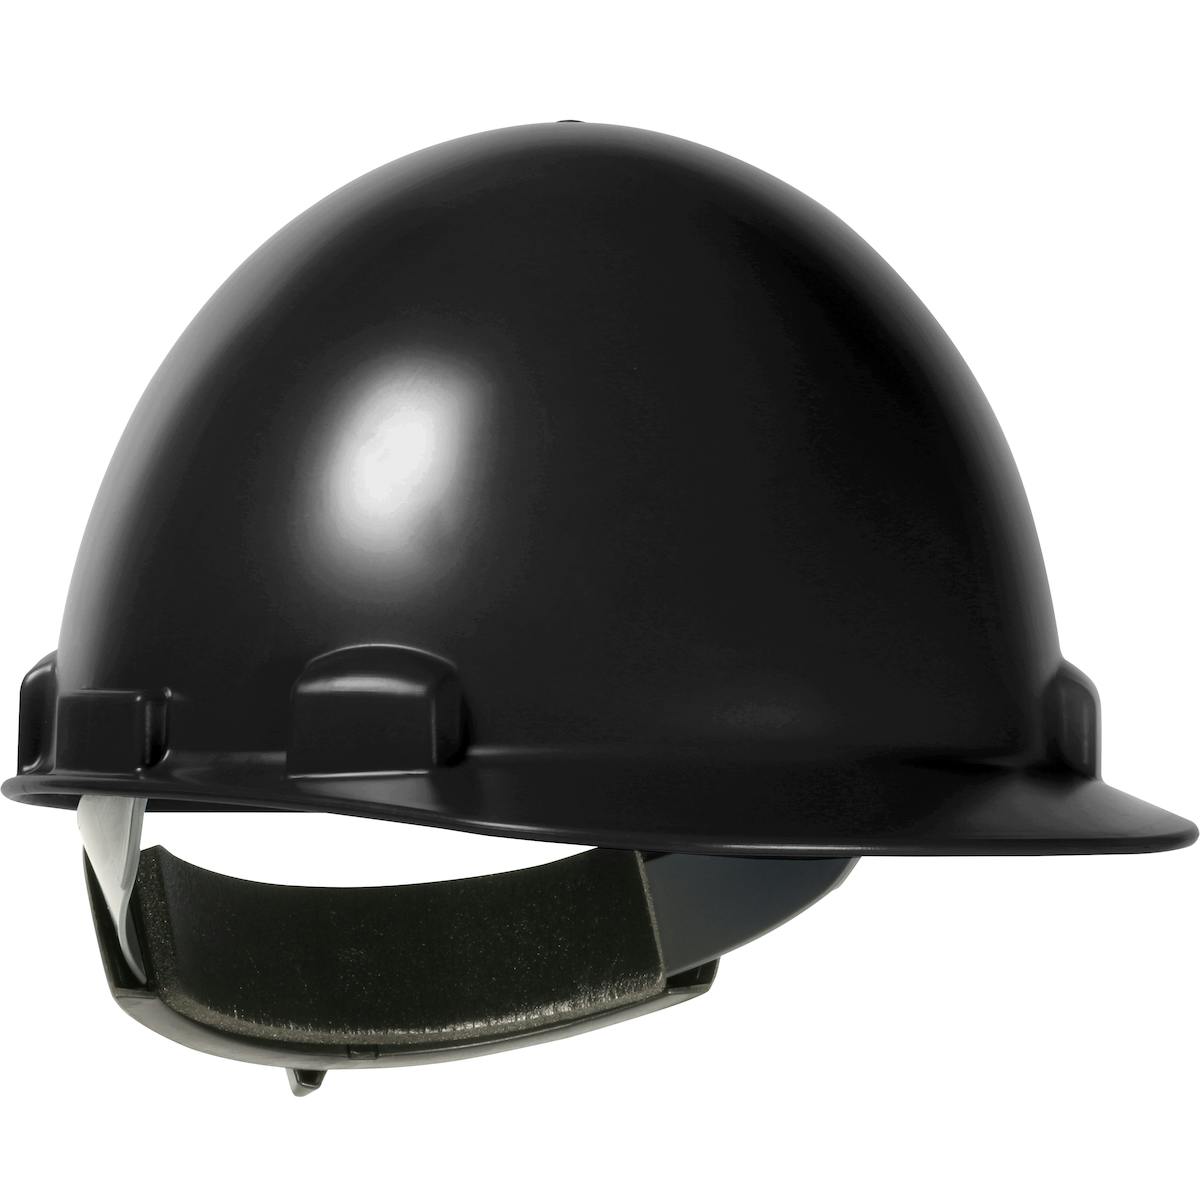 Stromboli™ Cap Style Smooth Dome Hard Hat with ABS/Polycarbonate Shell, 4-Point Textile Suspension and Swing Wheel-Ratchet Adjustment (280-HP841SR)